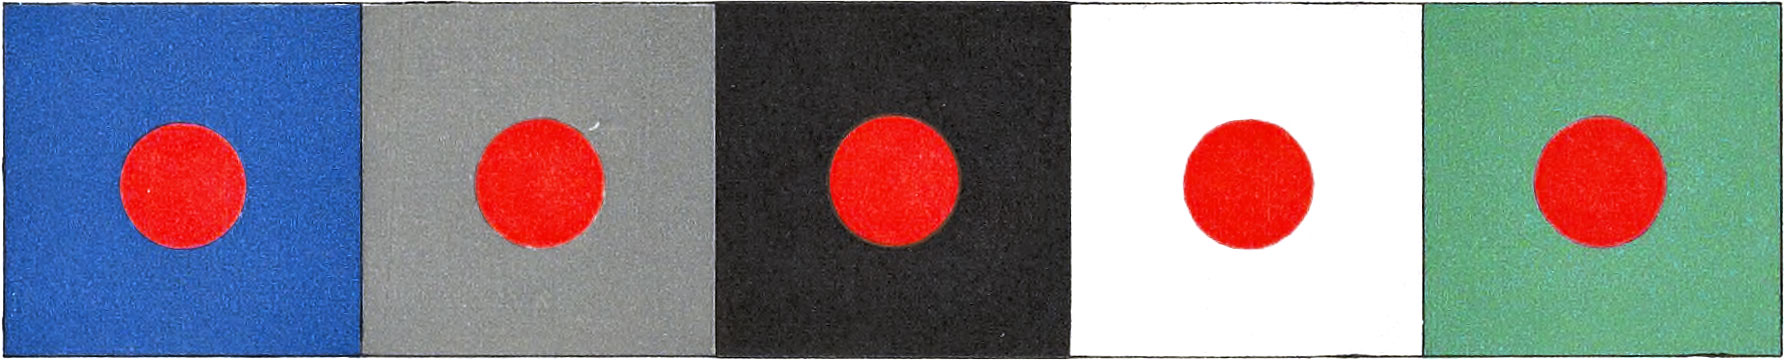 Row of five squares, blue, gray, black, white, and green with a large red circle in each